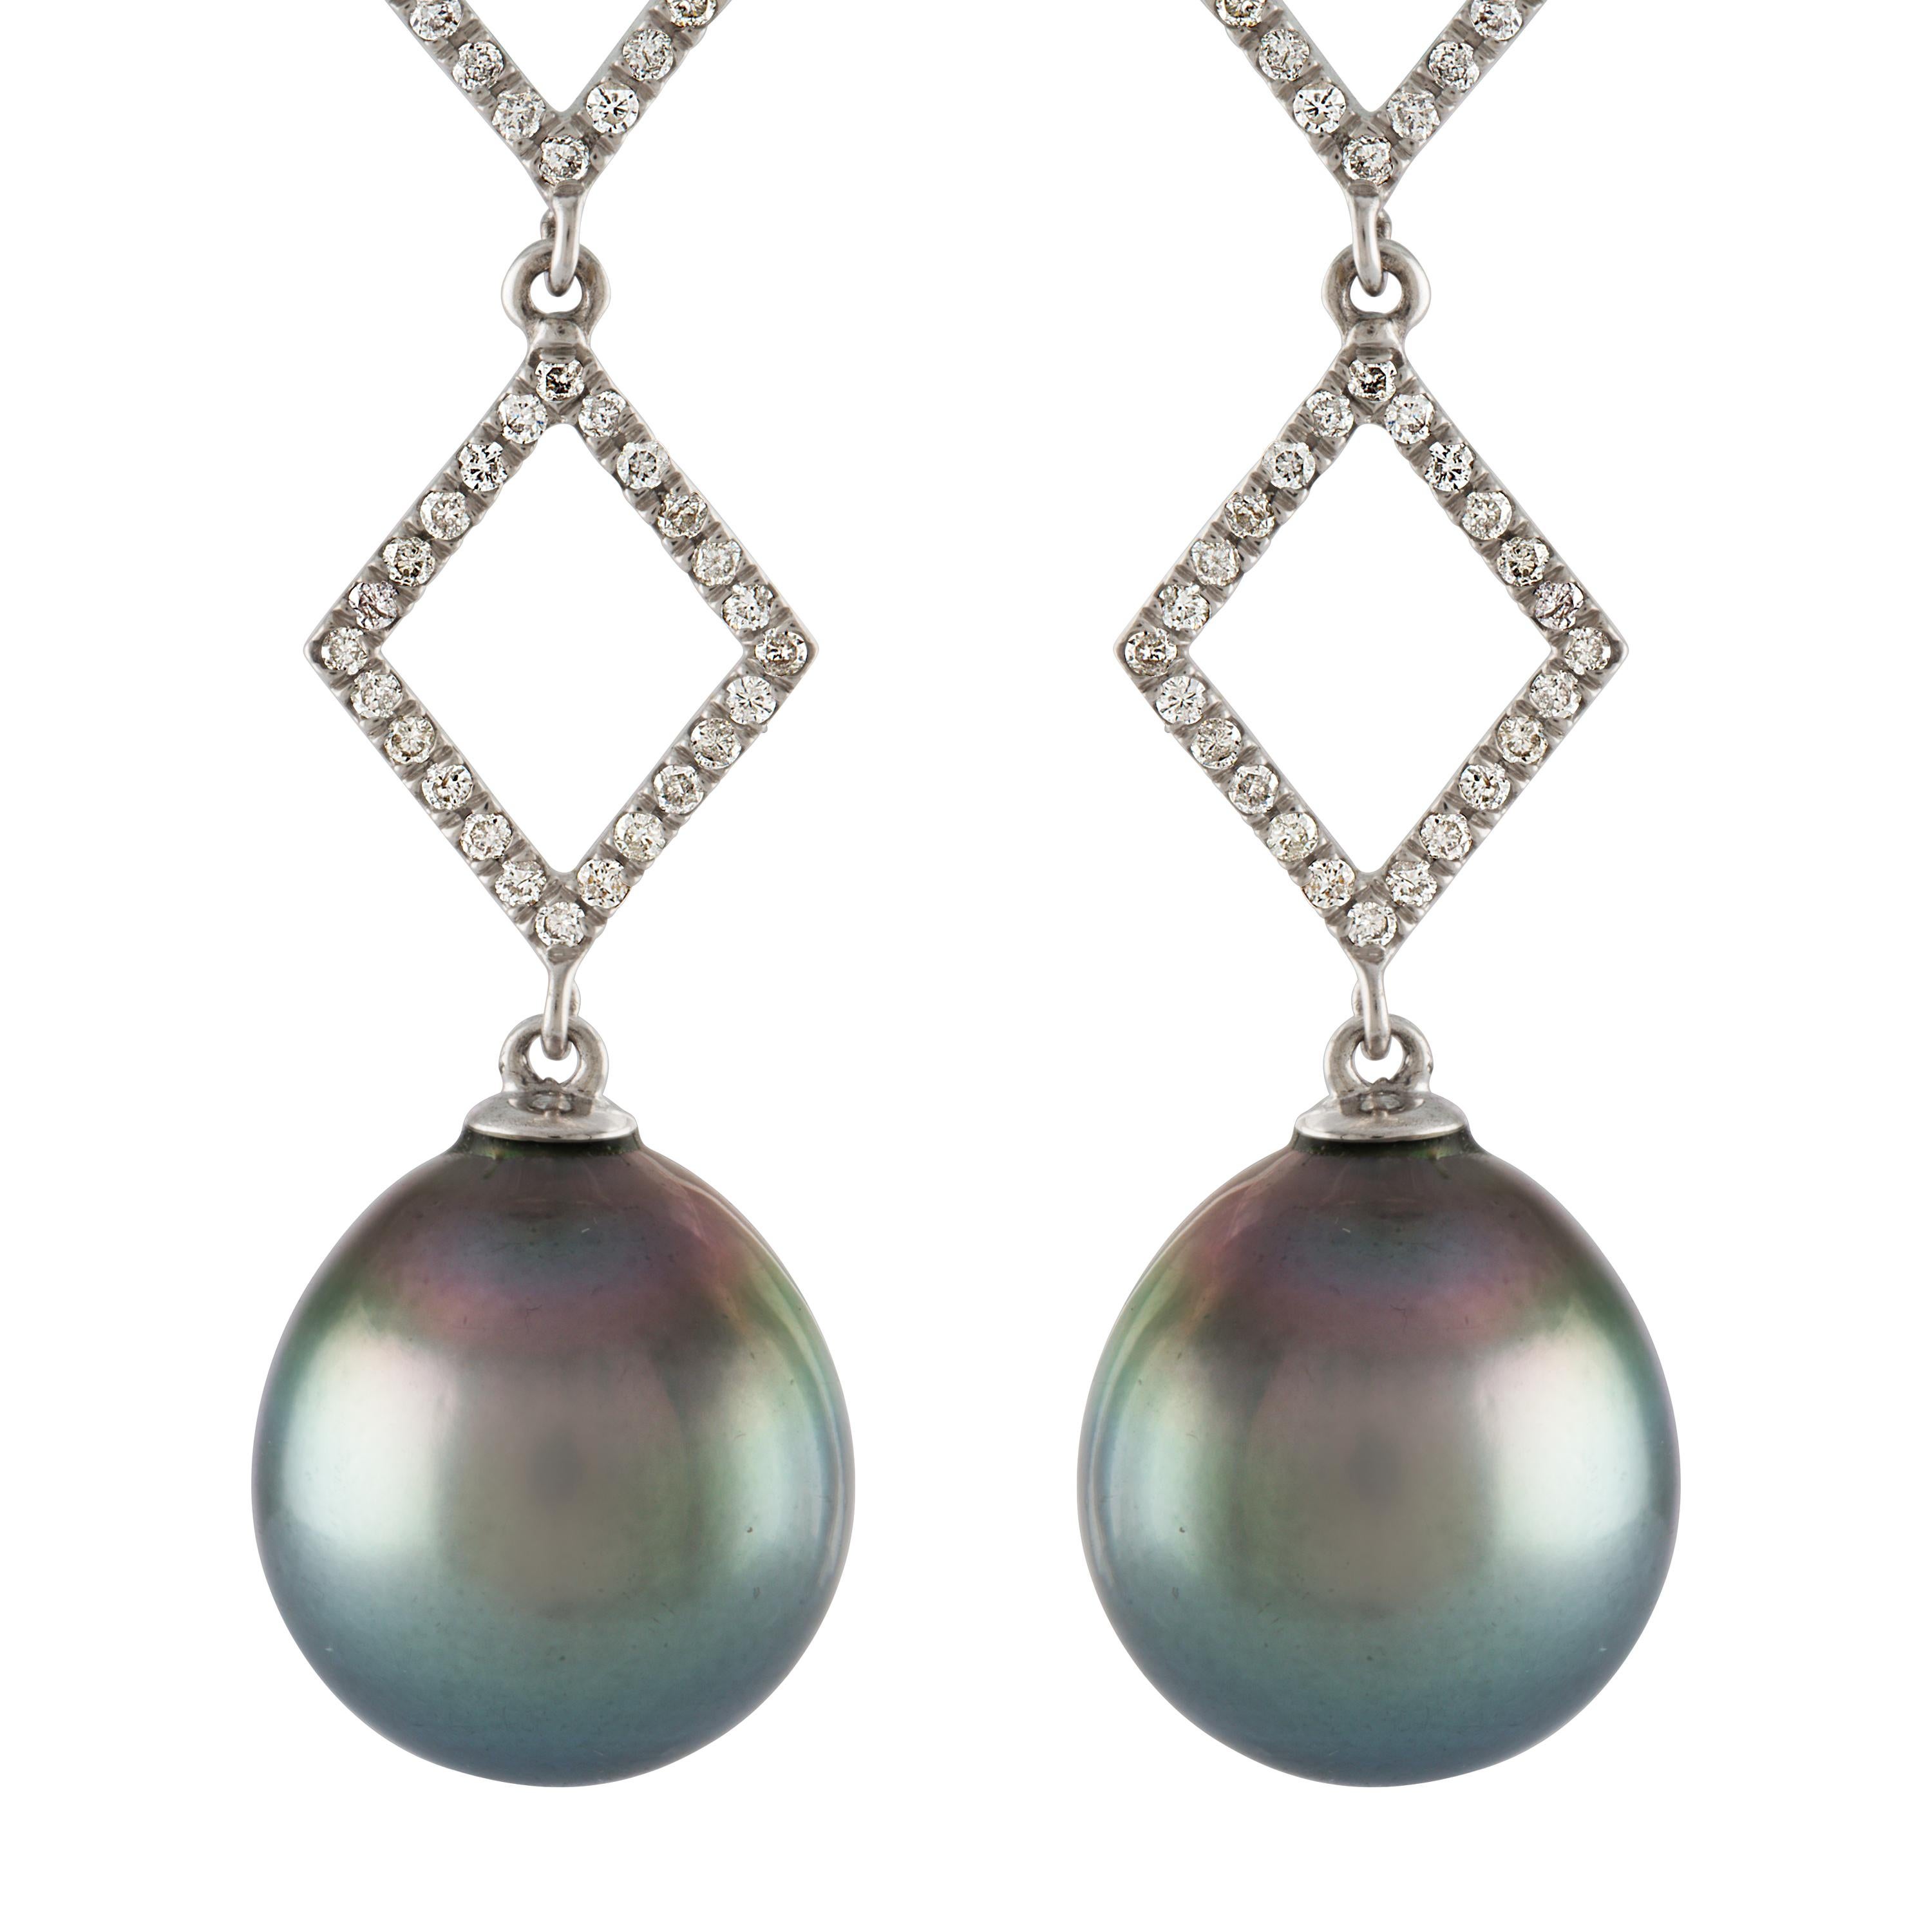 These earrings feature South Sea Tahitian cultured drop pearls measuring 14.3x16mm.
 The pearls are dangling from 14 karat white gold and diamond geometric graduating consisting of 0.78 carats of diamonds. 
The pearls have high luster with strong